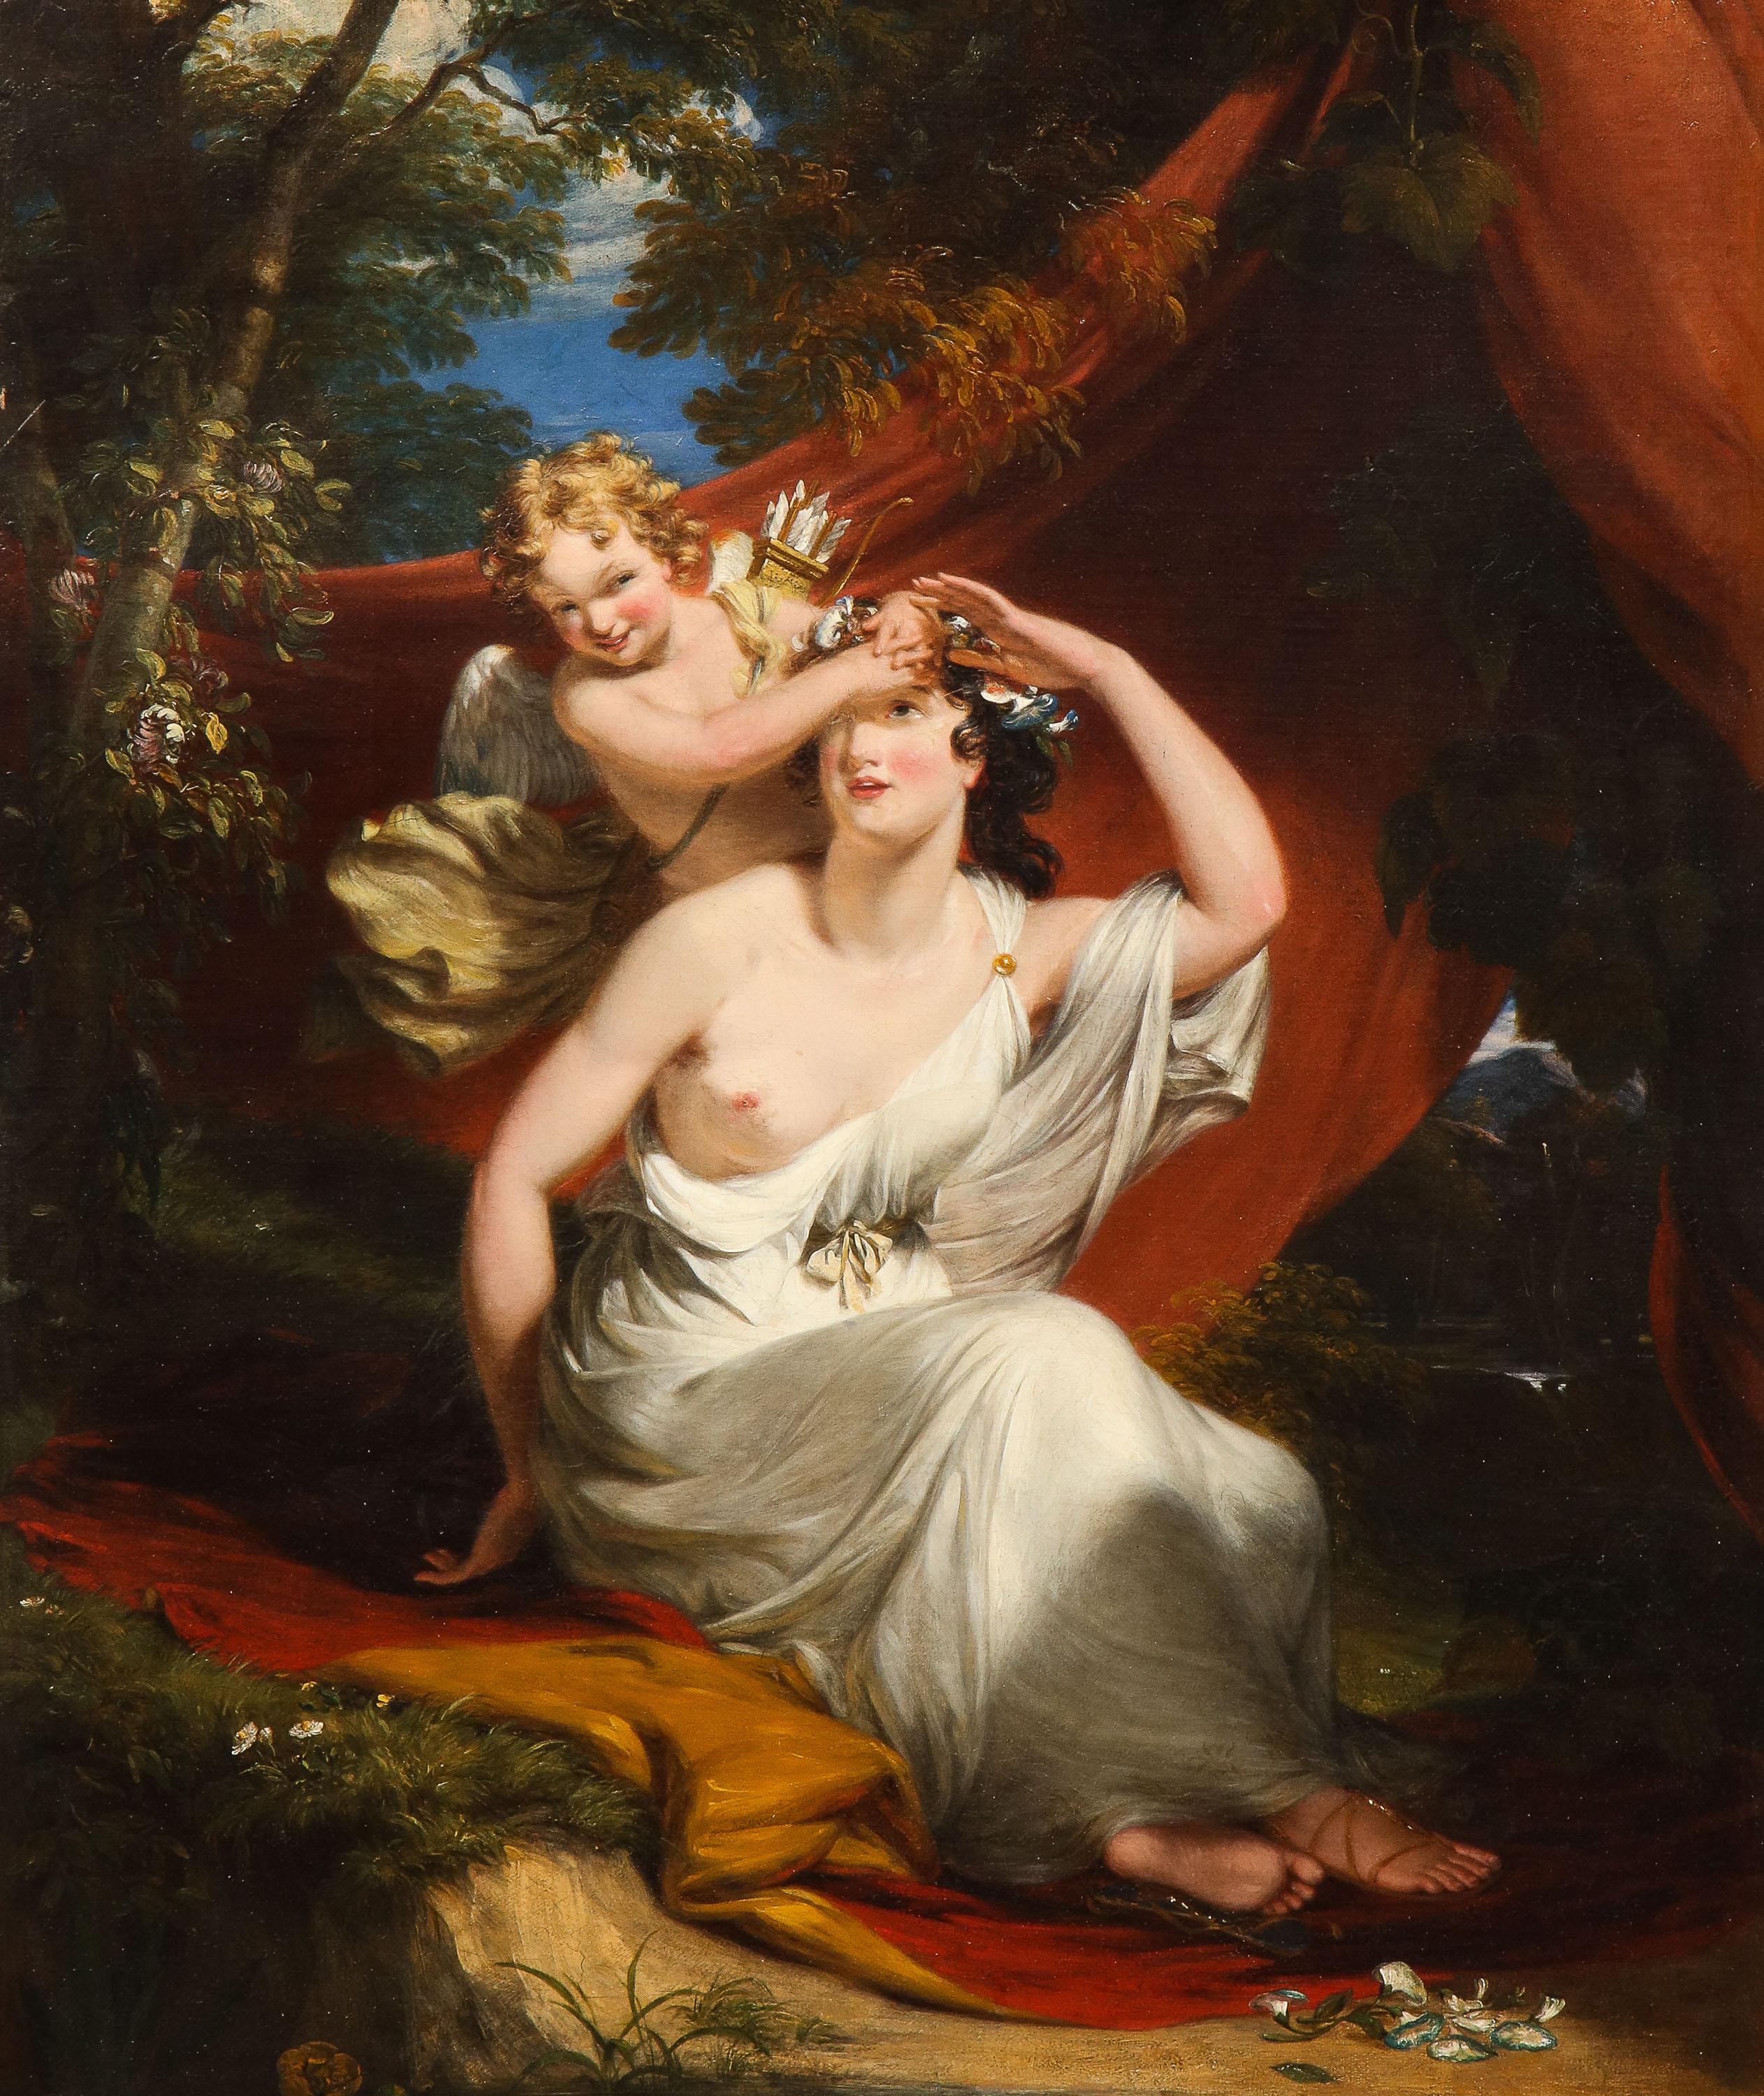 (French School) 18th Century, An Exceptional Quality Portrait of Venus and Cupid - Painting by Unknown